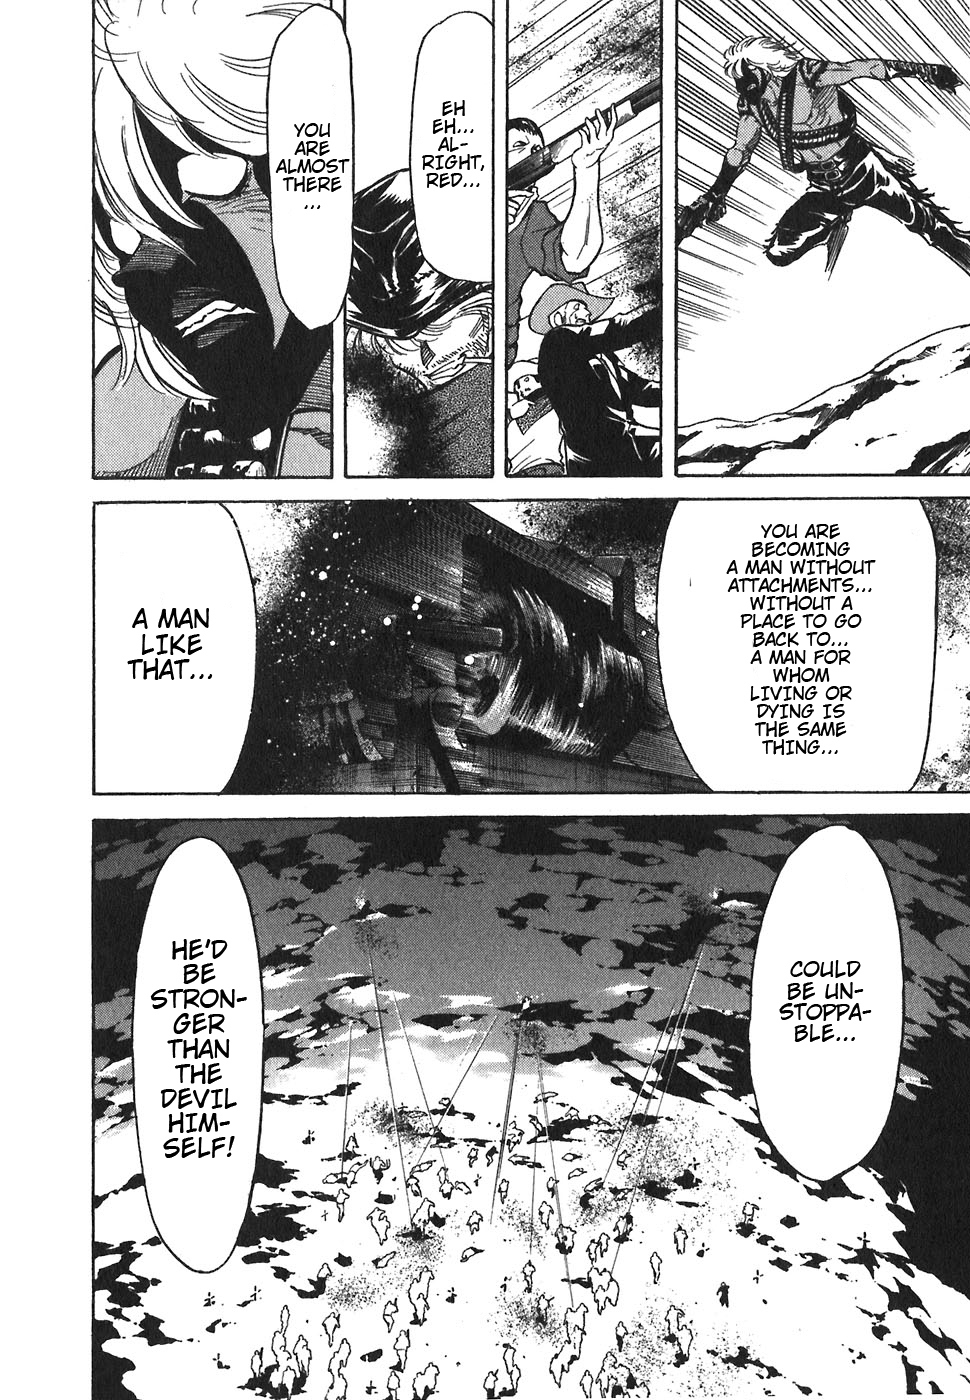 RED: Living on the Edge Vol. 10 Ch. 77 Death Wish 6